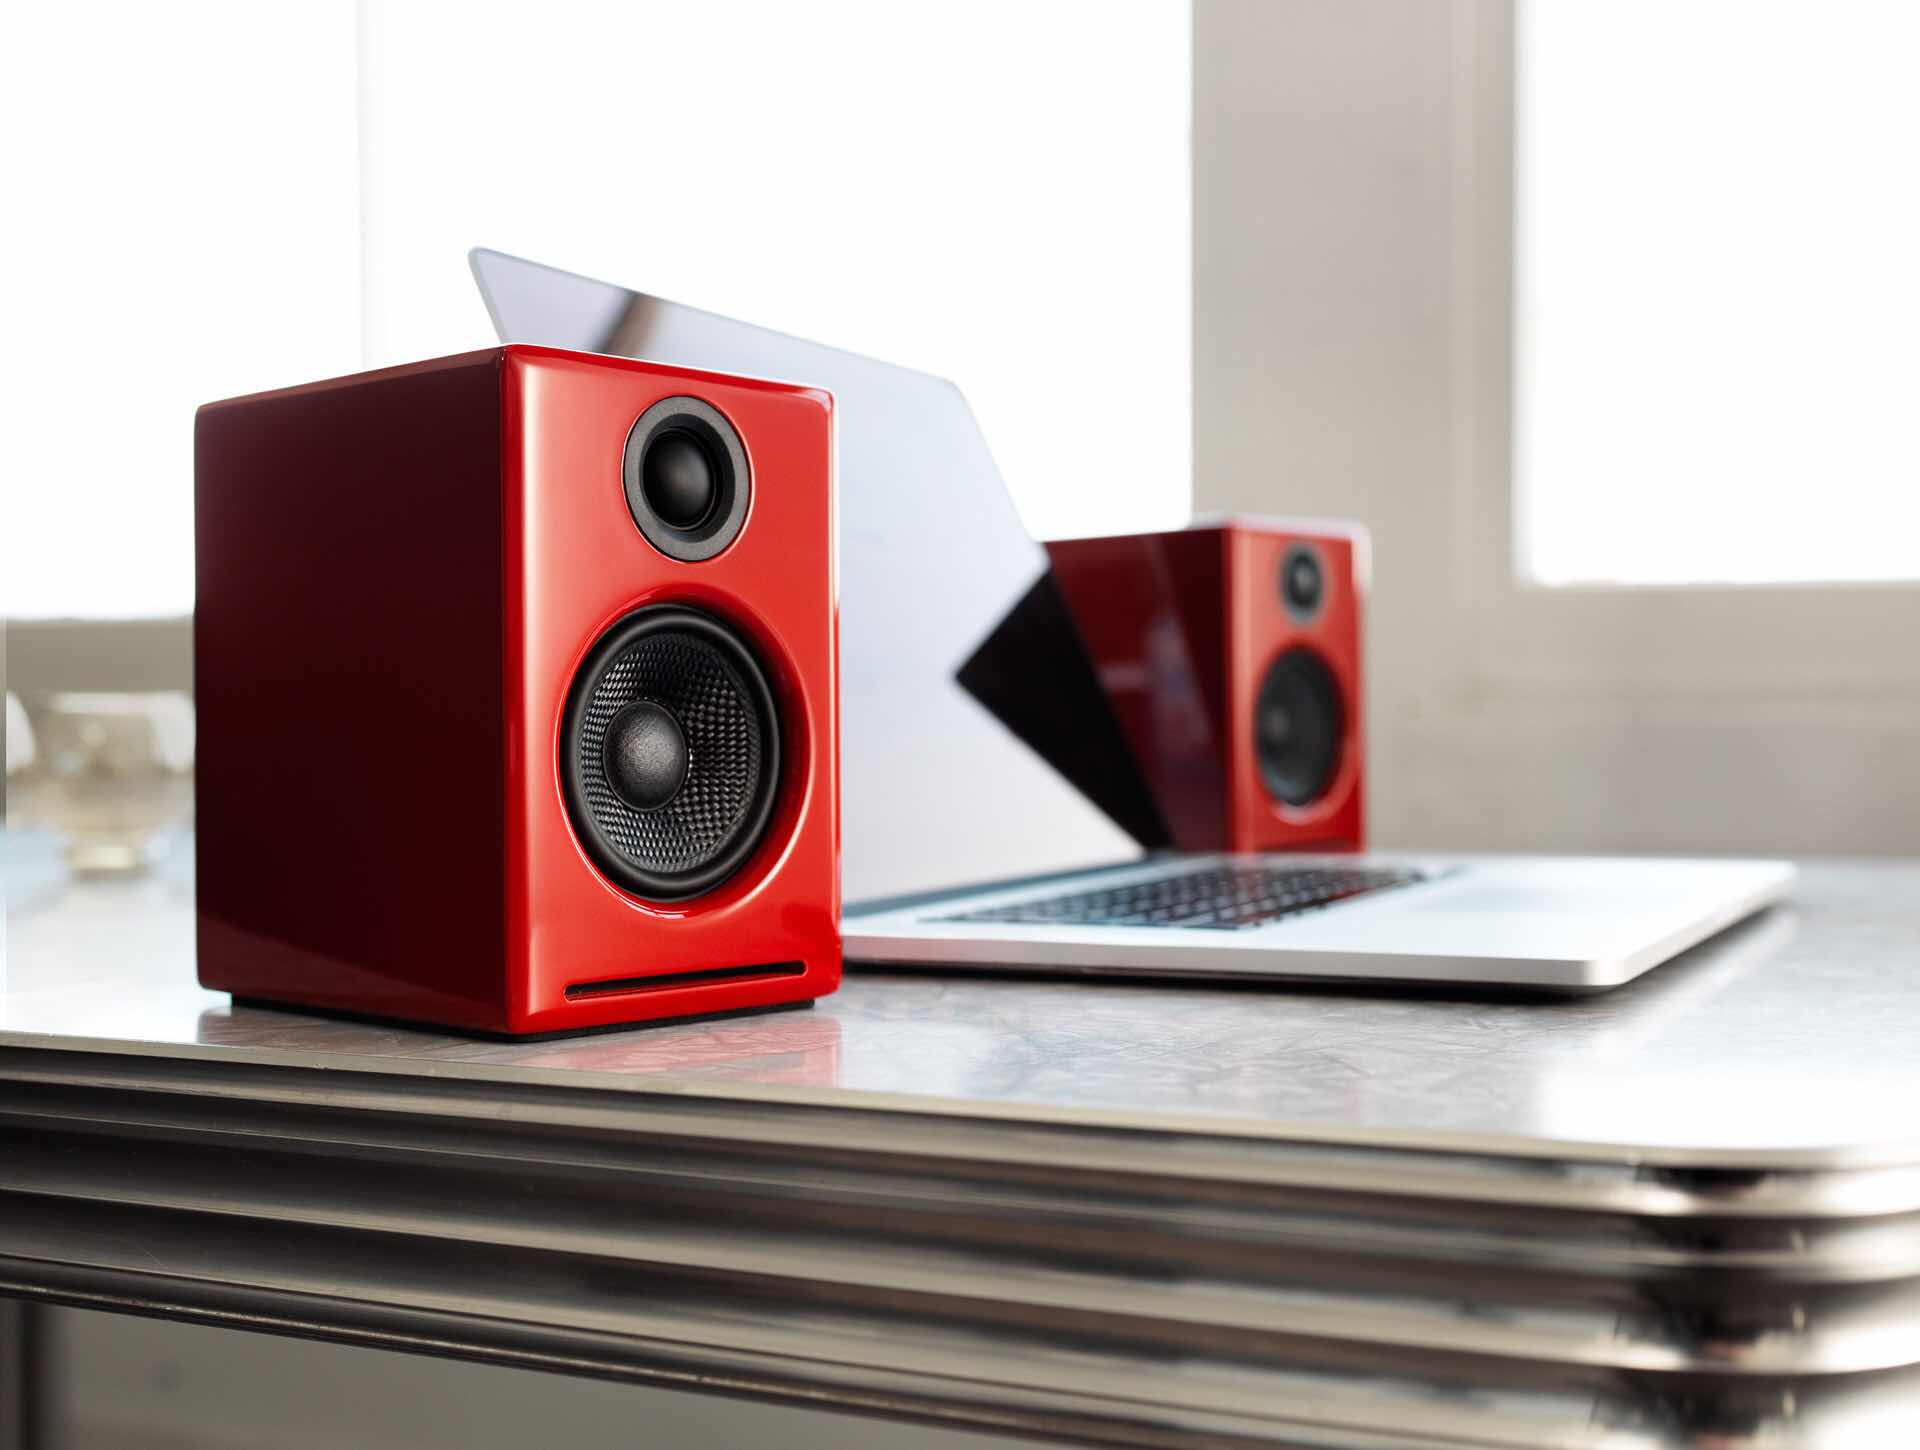 Audioengine A2+ wireless computer speakers. ($269, in your choice of red, black, or white)